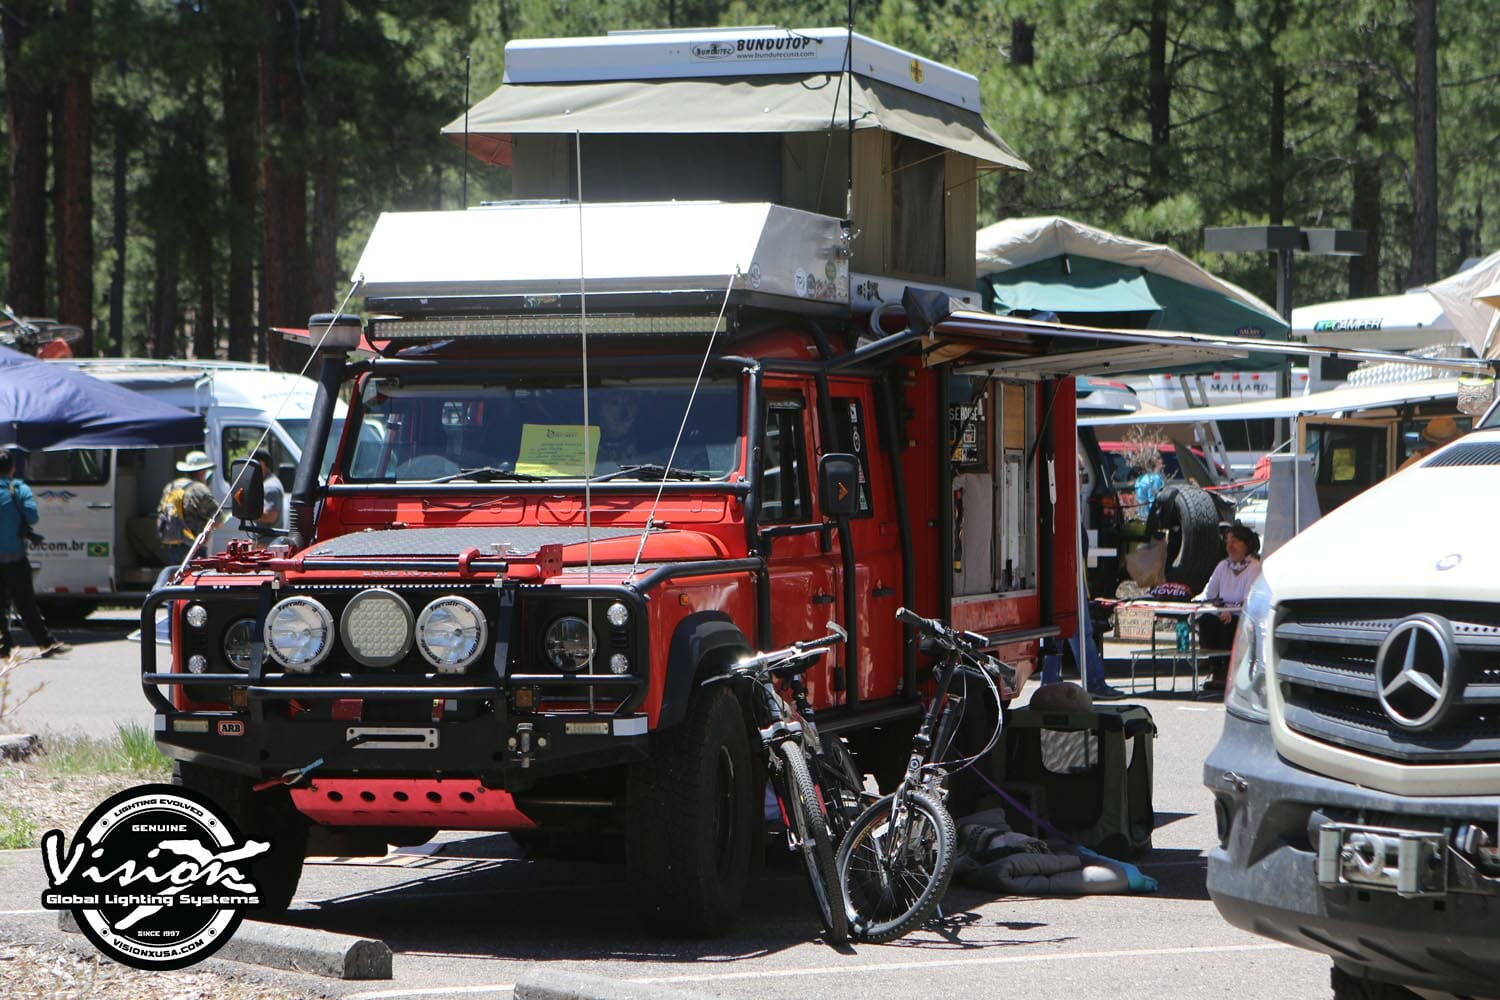 Vision_X_Overland_Expo_001